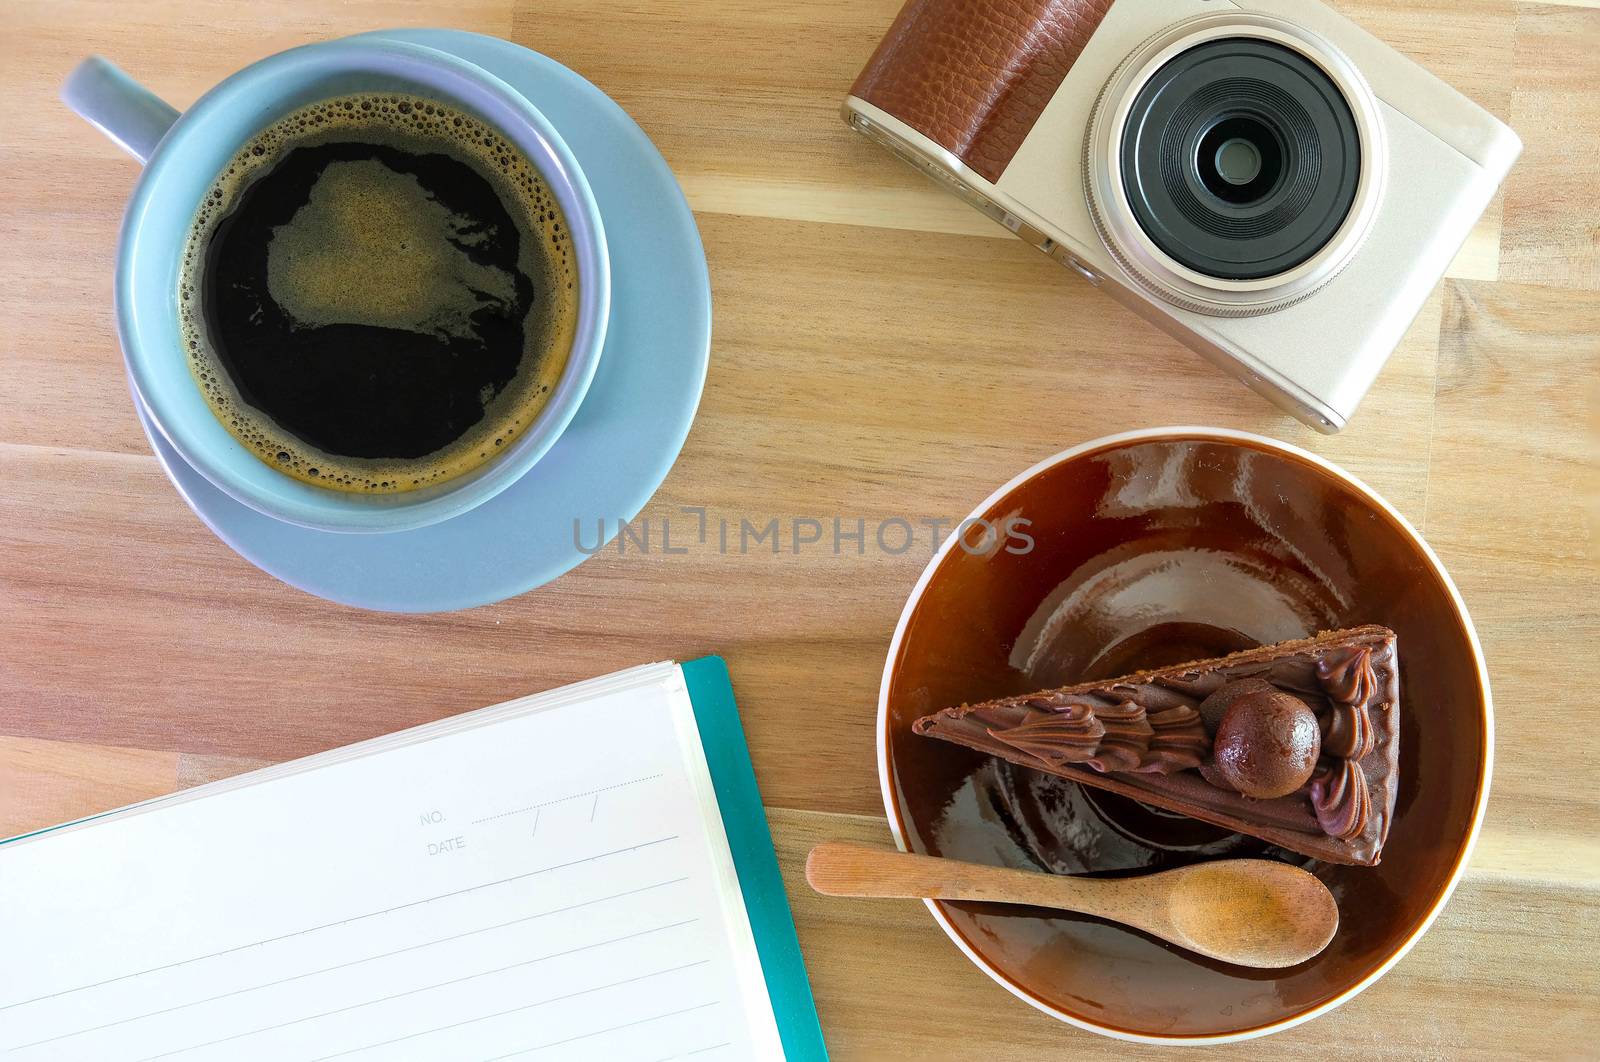 The notebook, camera,  coffee, chocolate cake on wooden backgrou by Bonn2210